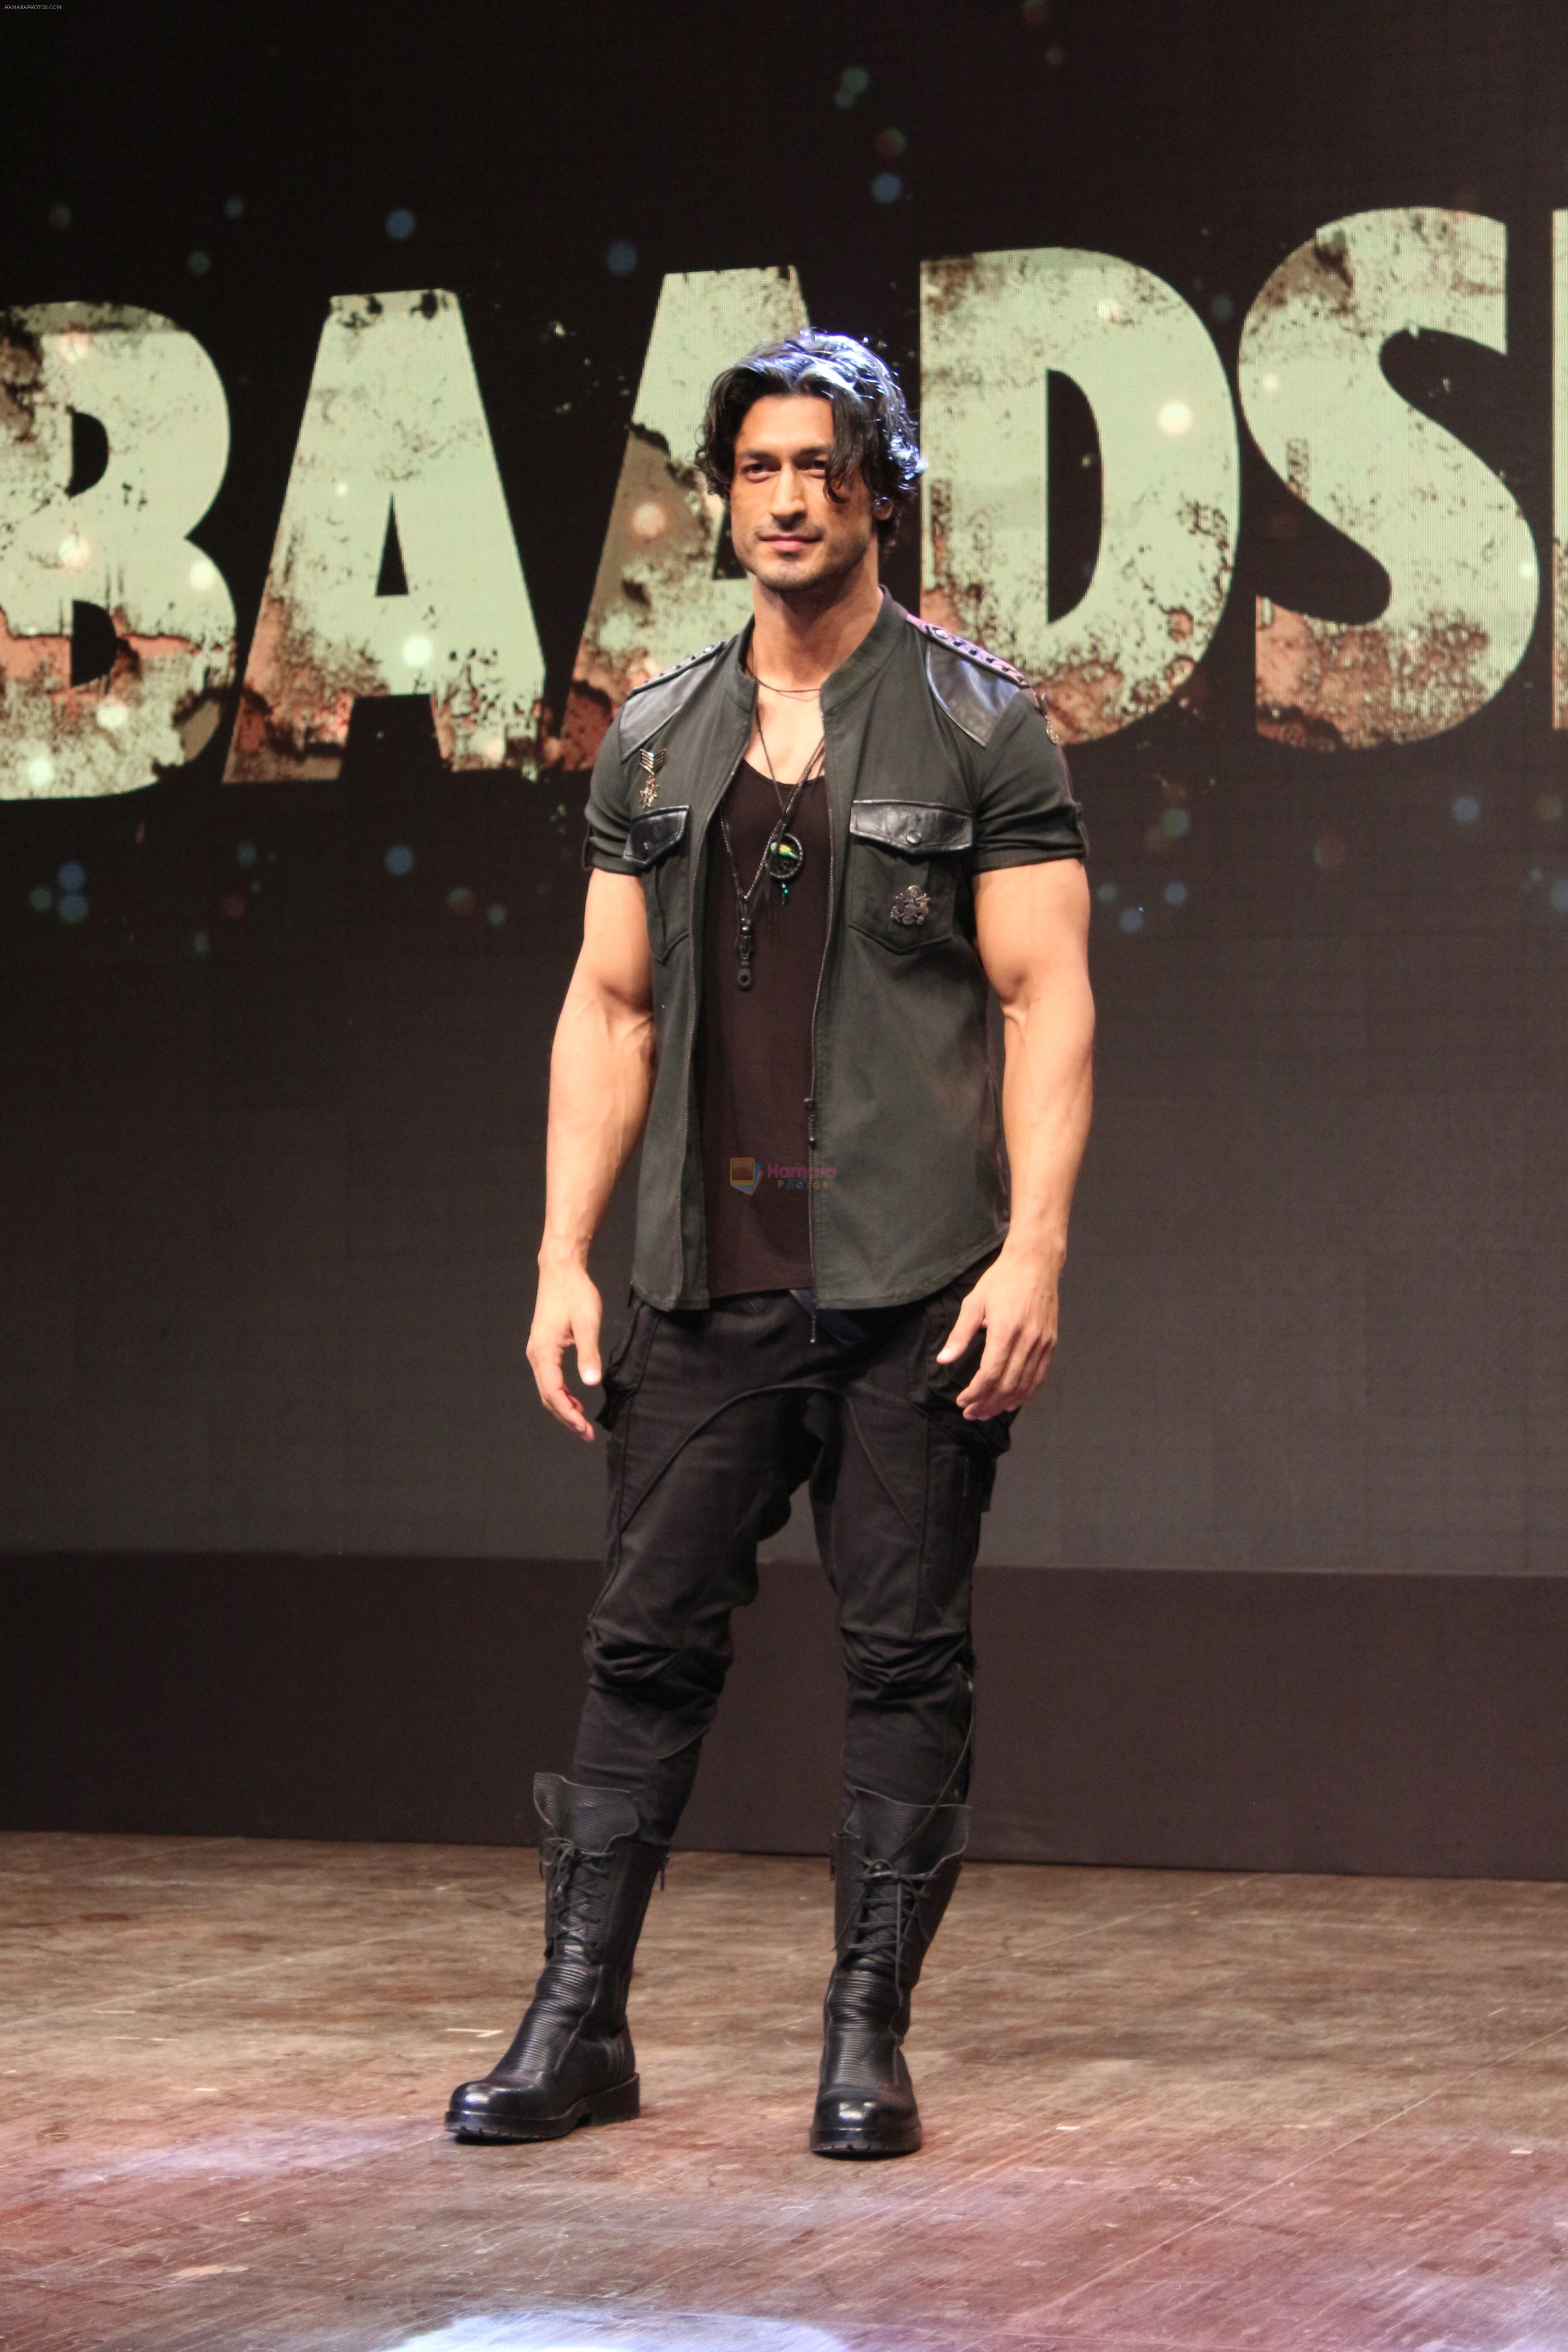 Vidyut Jammwal at The Trailer Launch Of Baadshaho on 7th Aug 2017-1